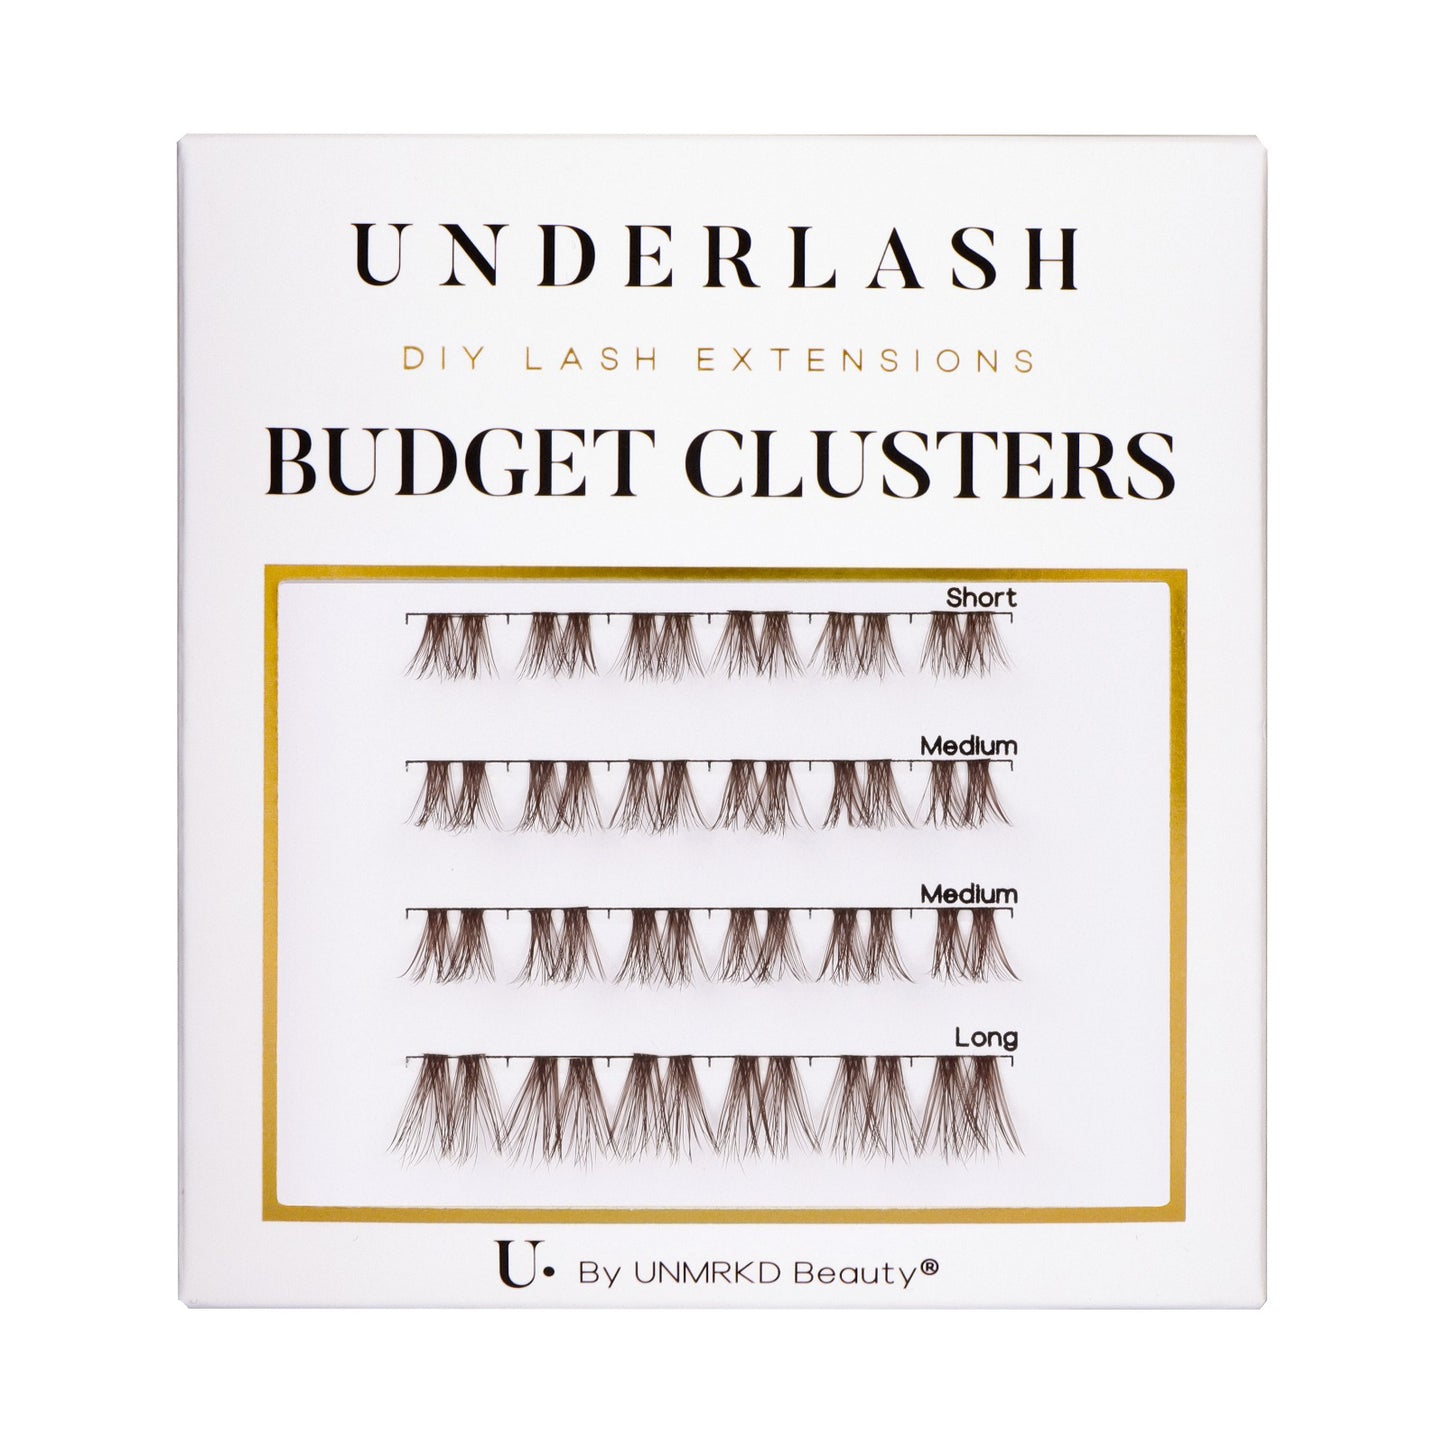 BUDGET CLUSTERS